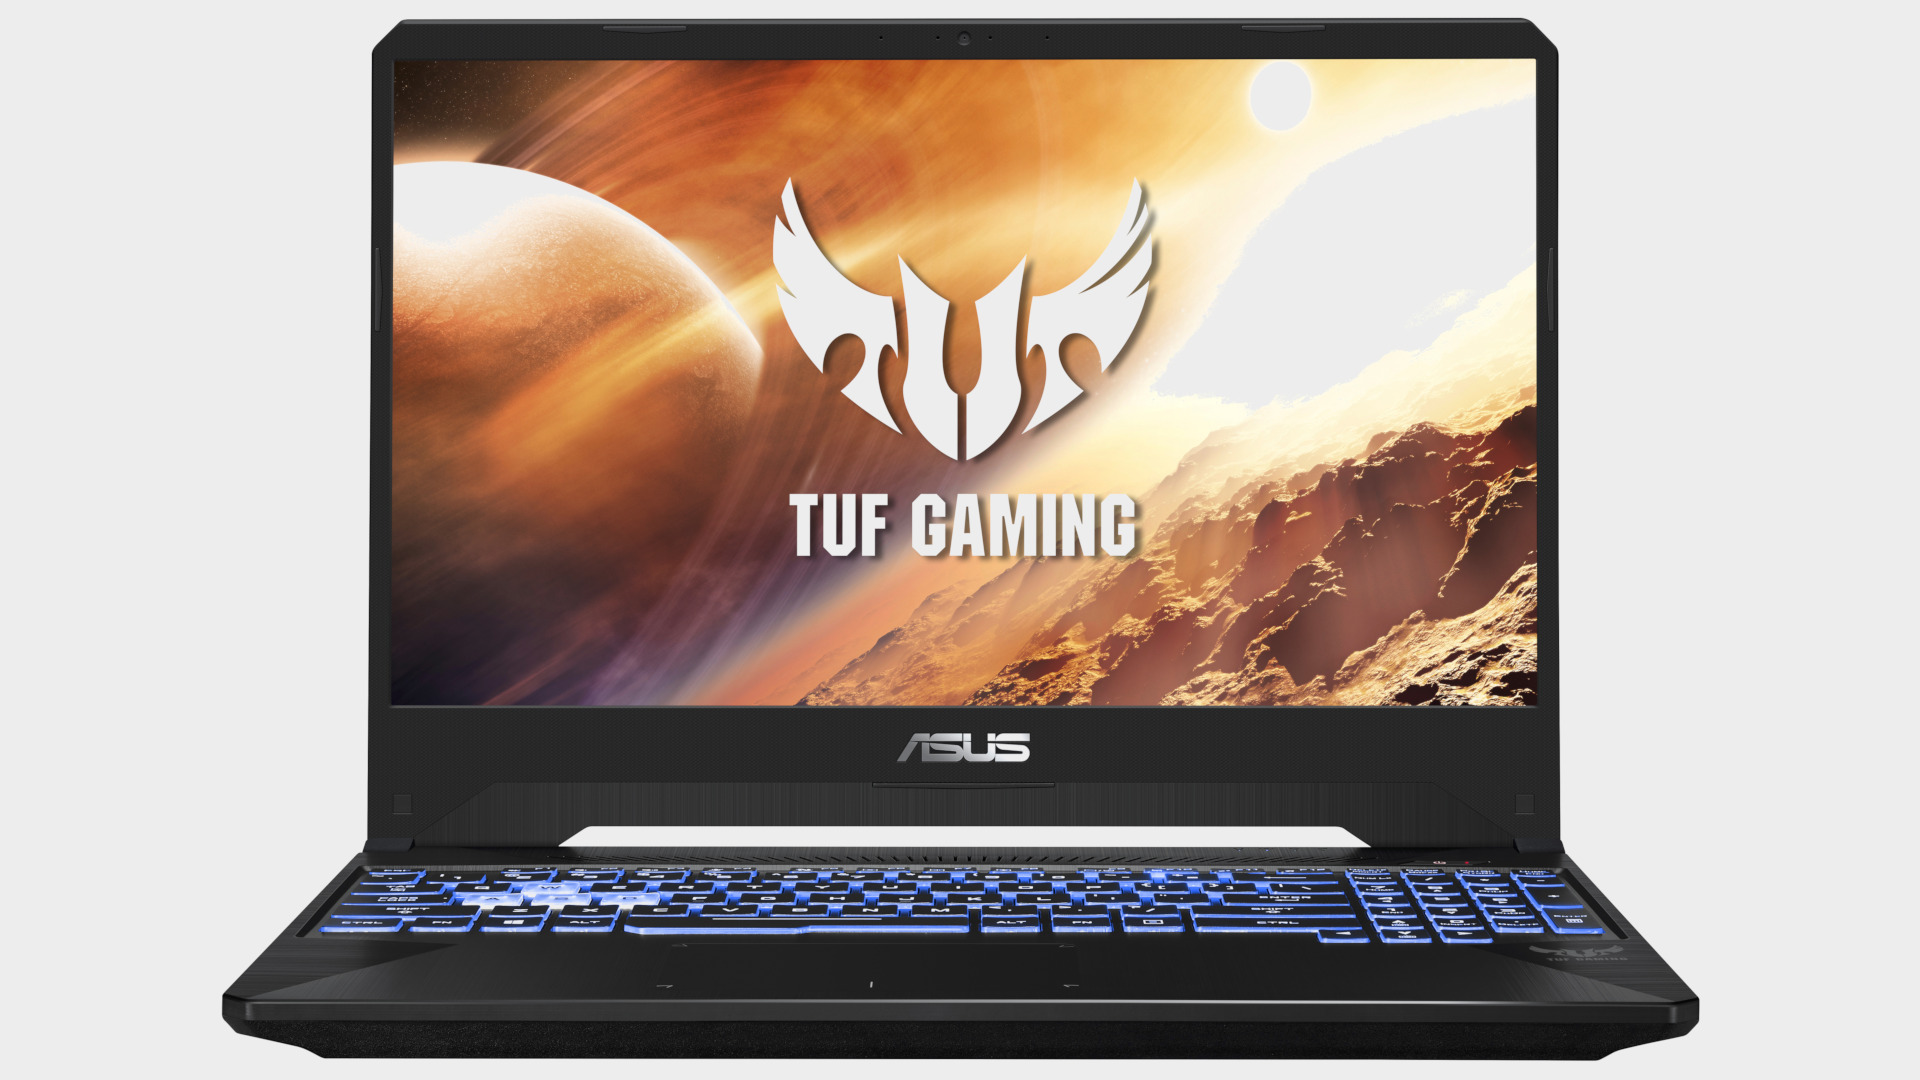 This Asus gaming laptop with a GTX 1650 